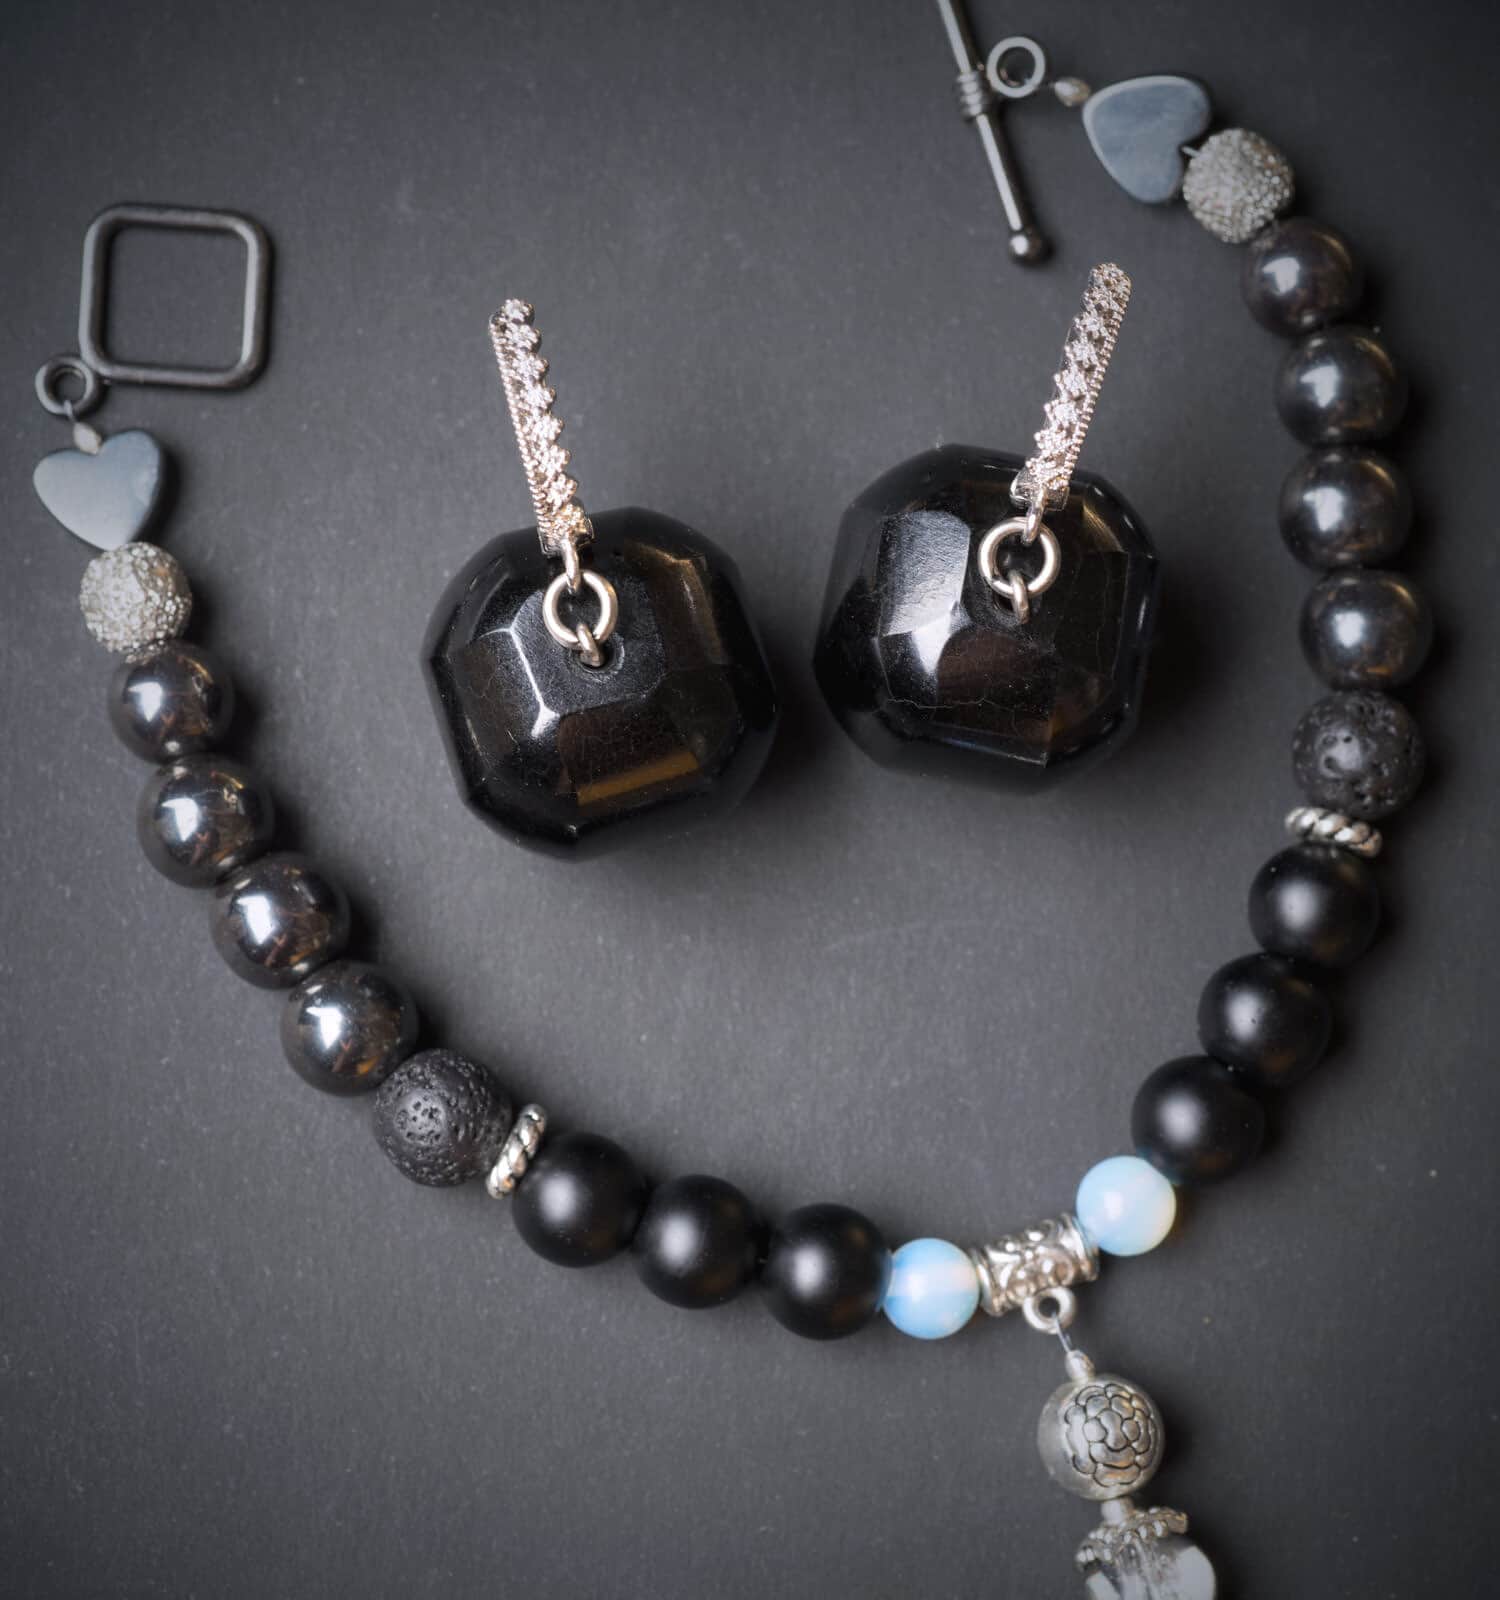 jewel handmade bracelet with semipreciouse stones and earrings with black  semiprecious gem jet at black background